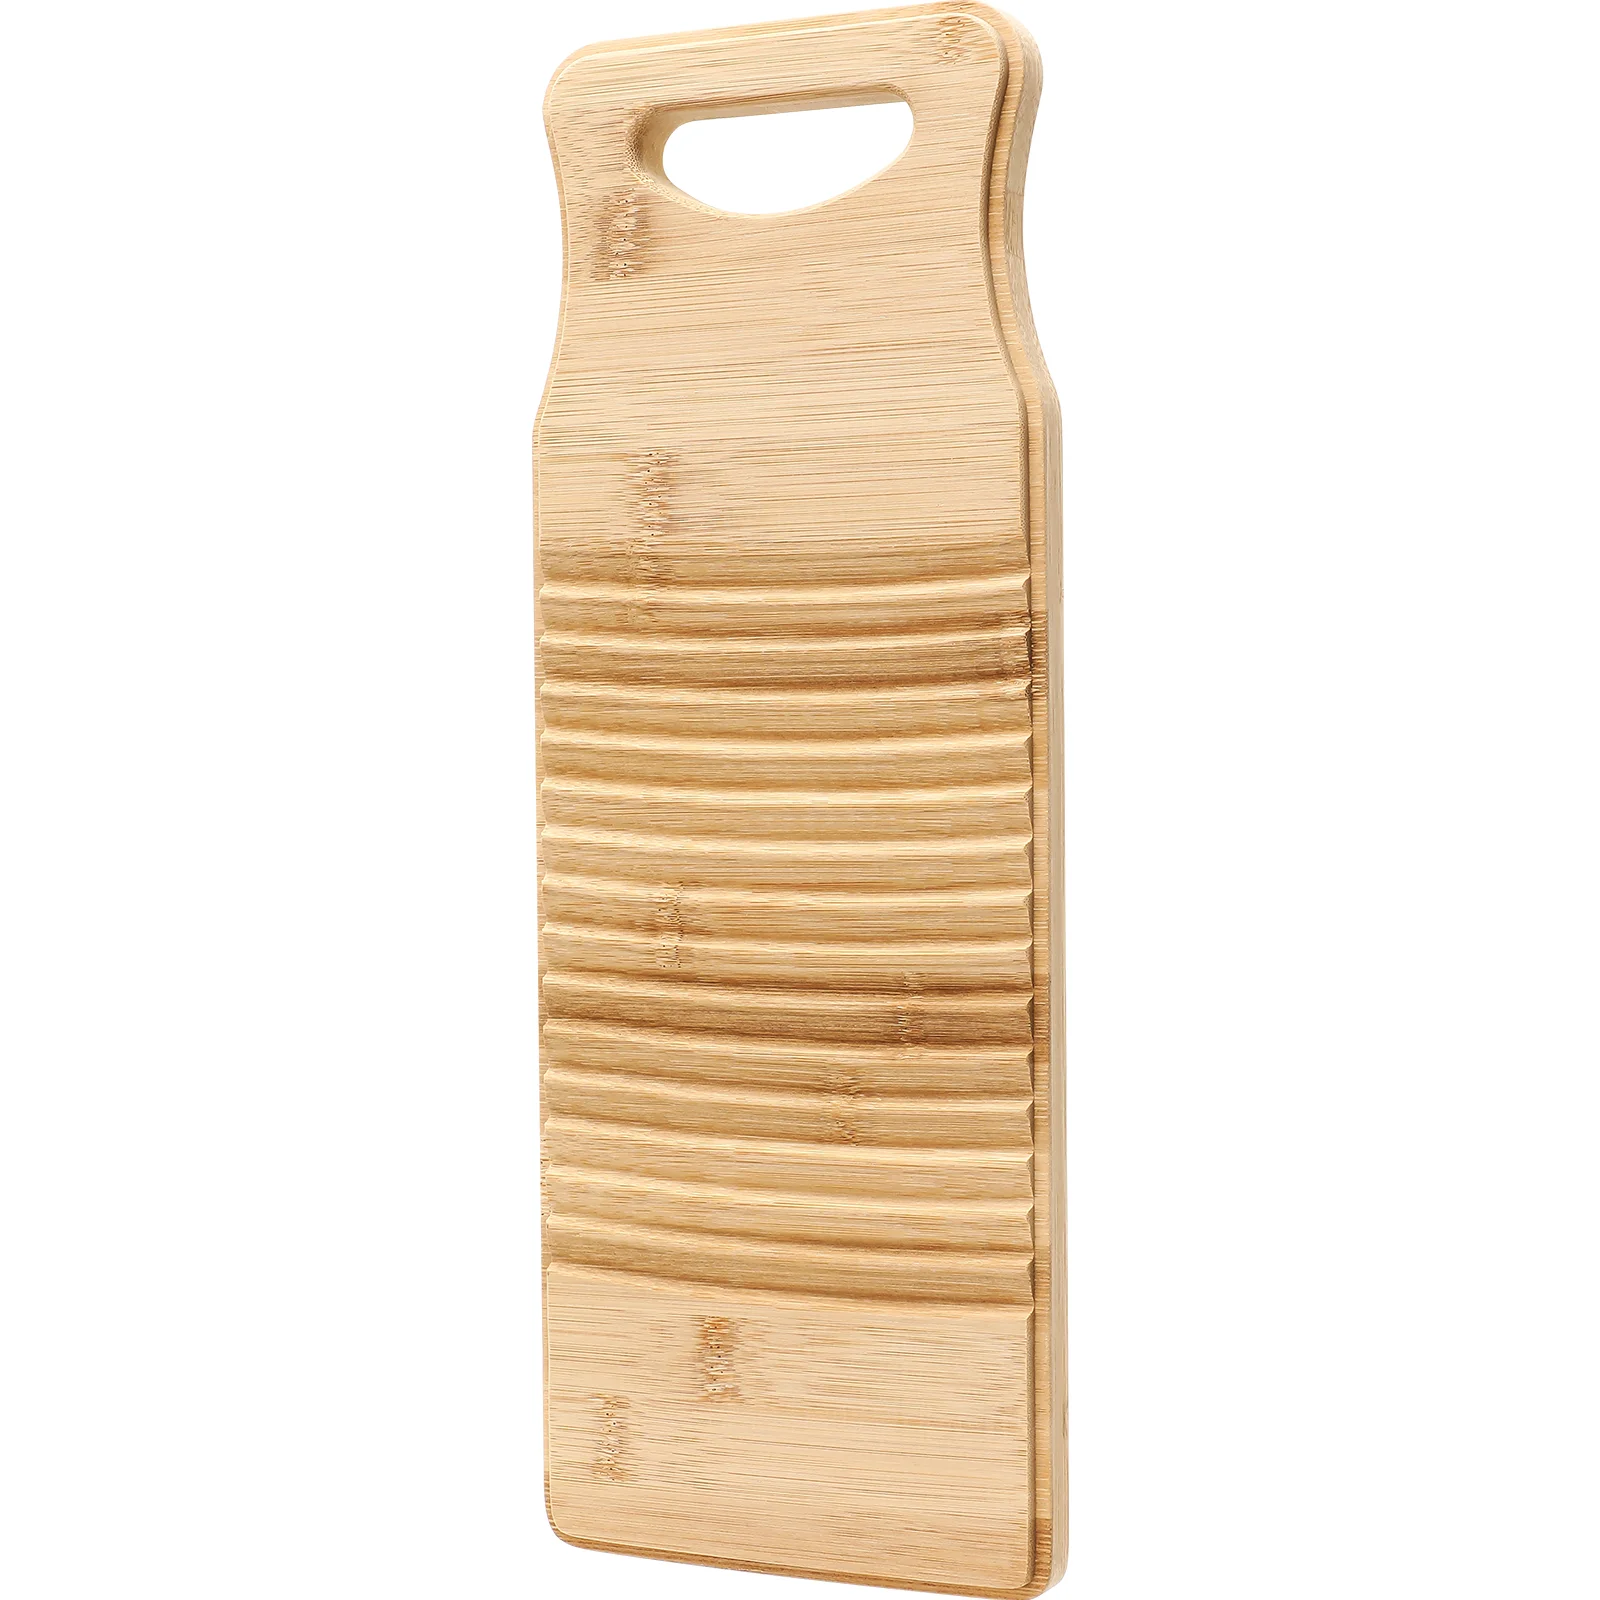 

Washing Board Laundry Washboard Clothes Supplies Accessories Wood Boards-old Fashioned Mini